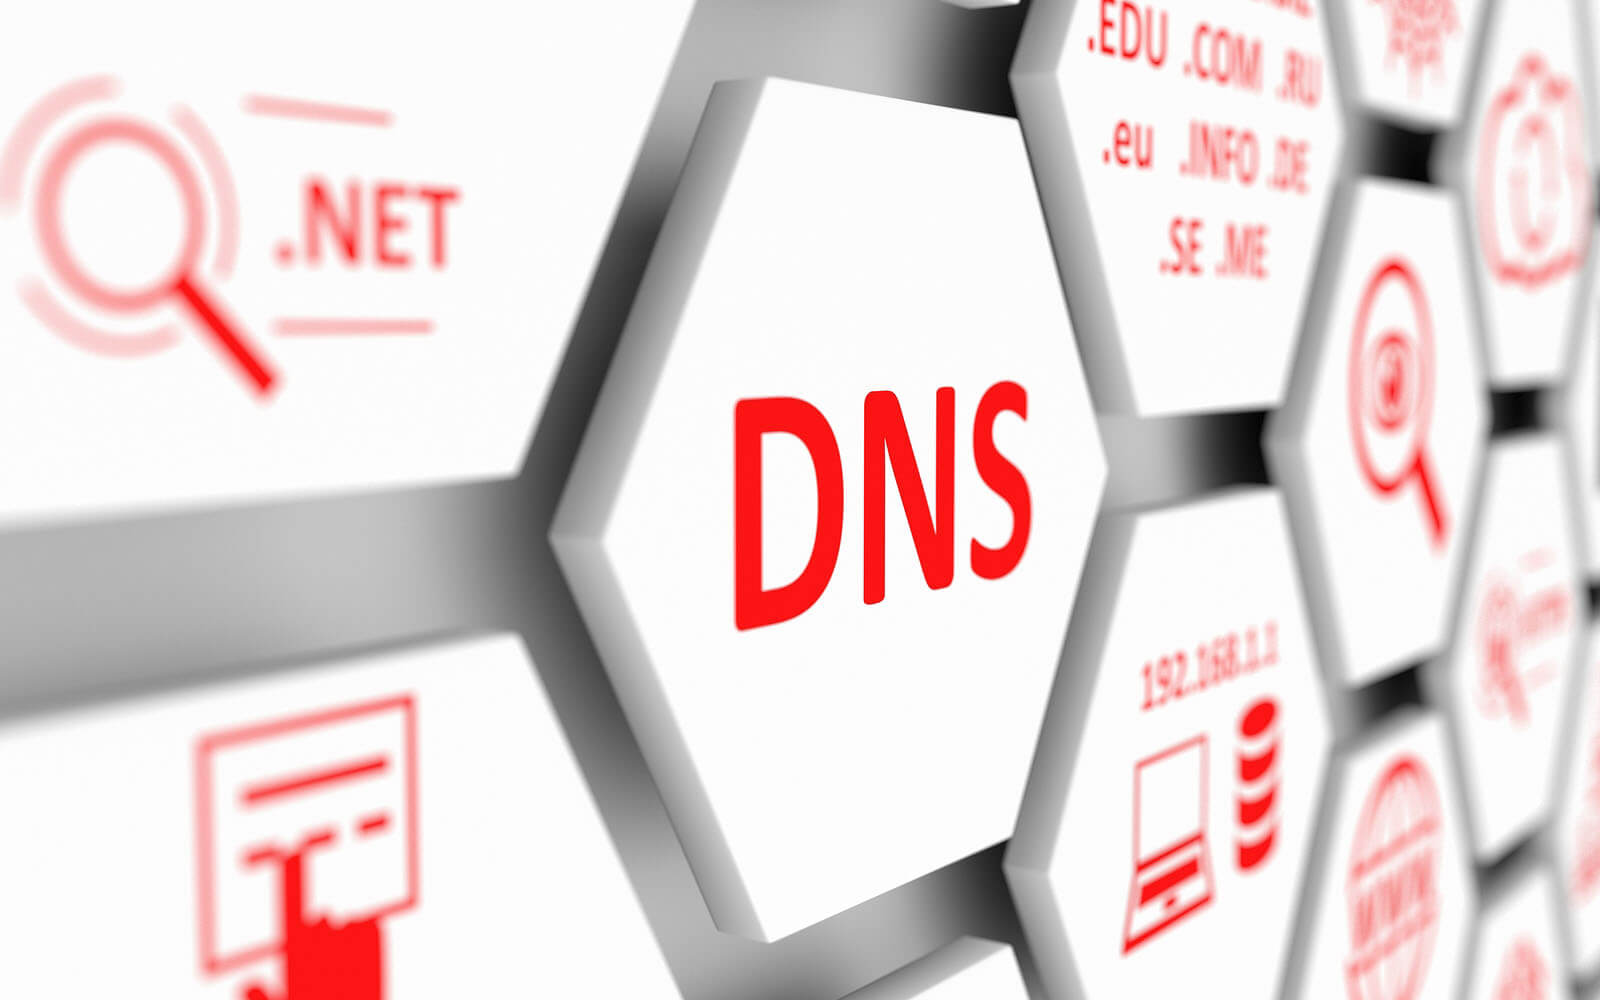 Windows 10 gets DNS over HTTPS support for Windows Insiders